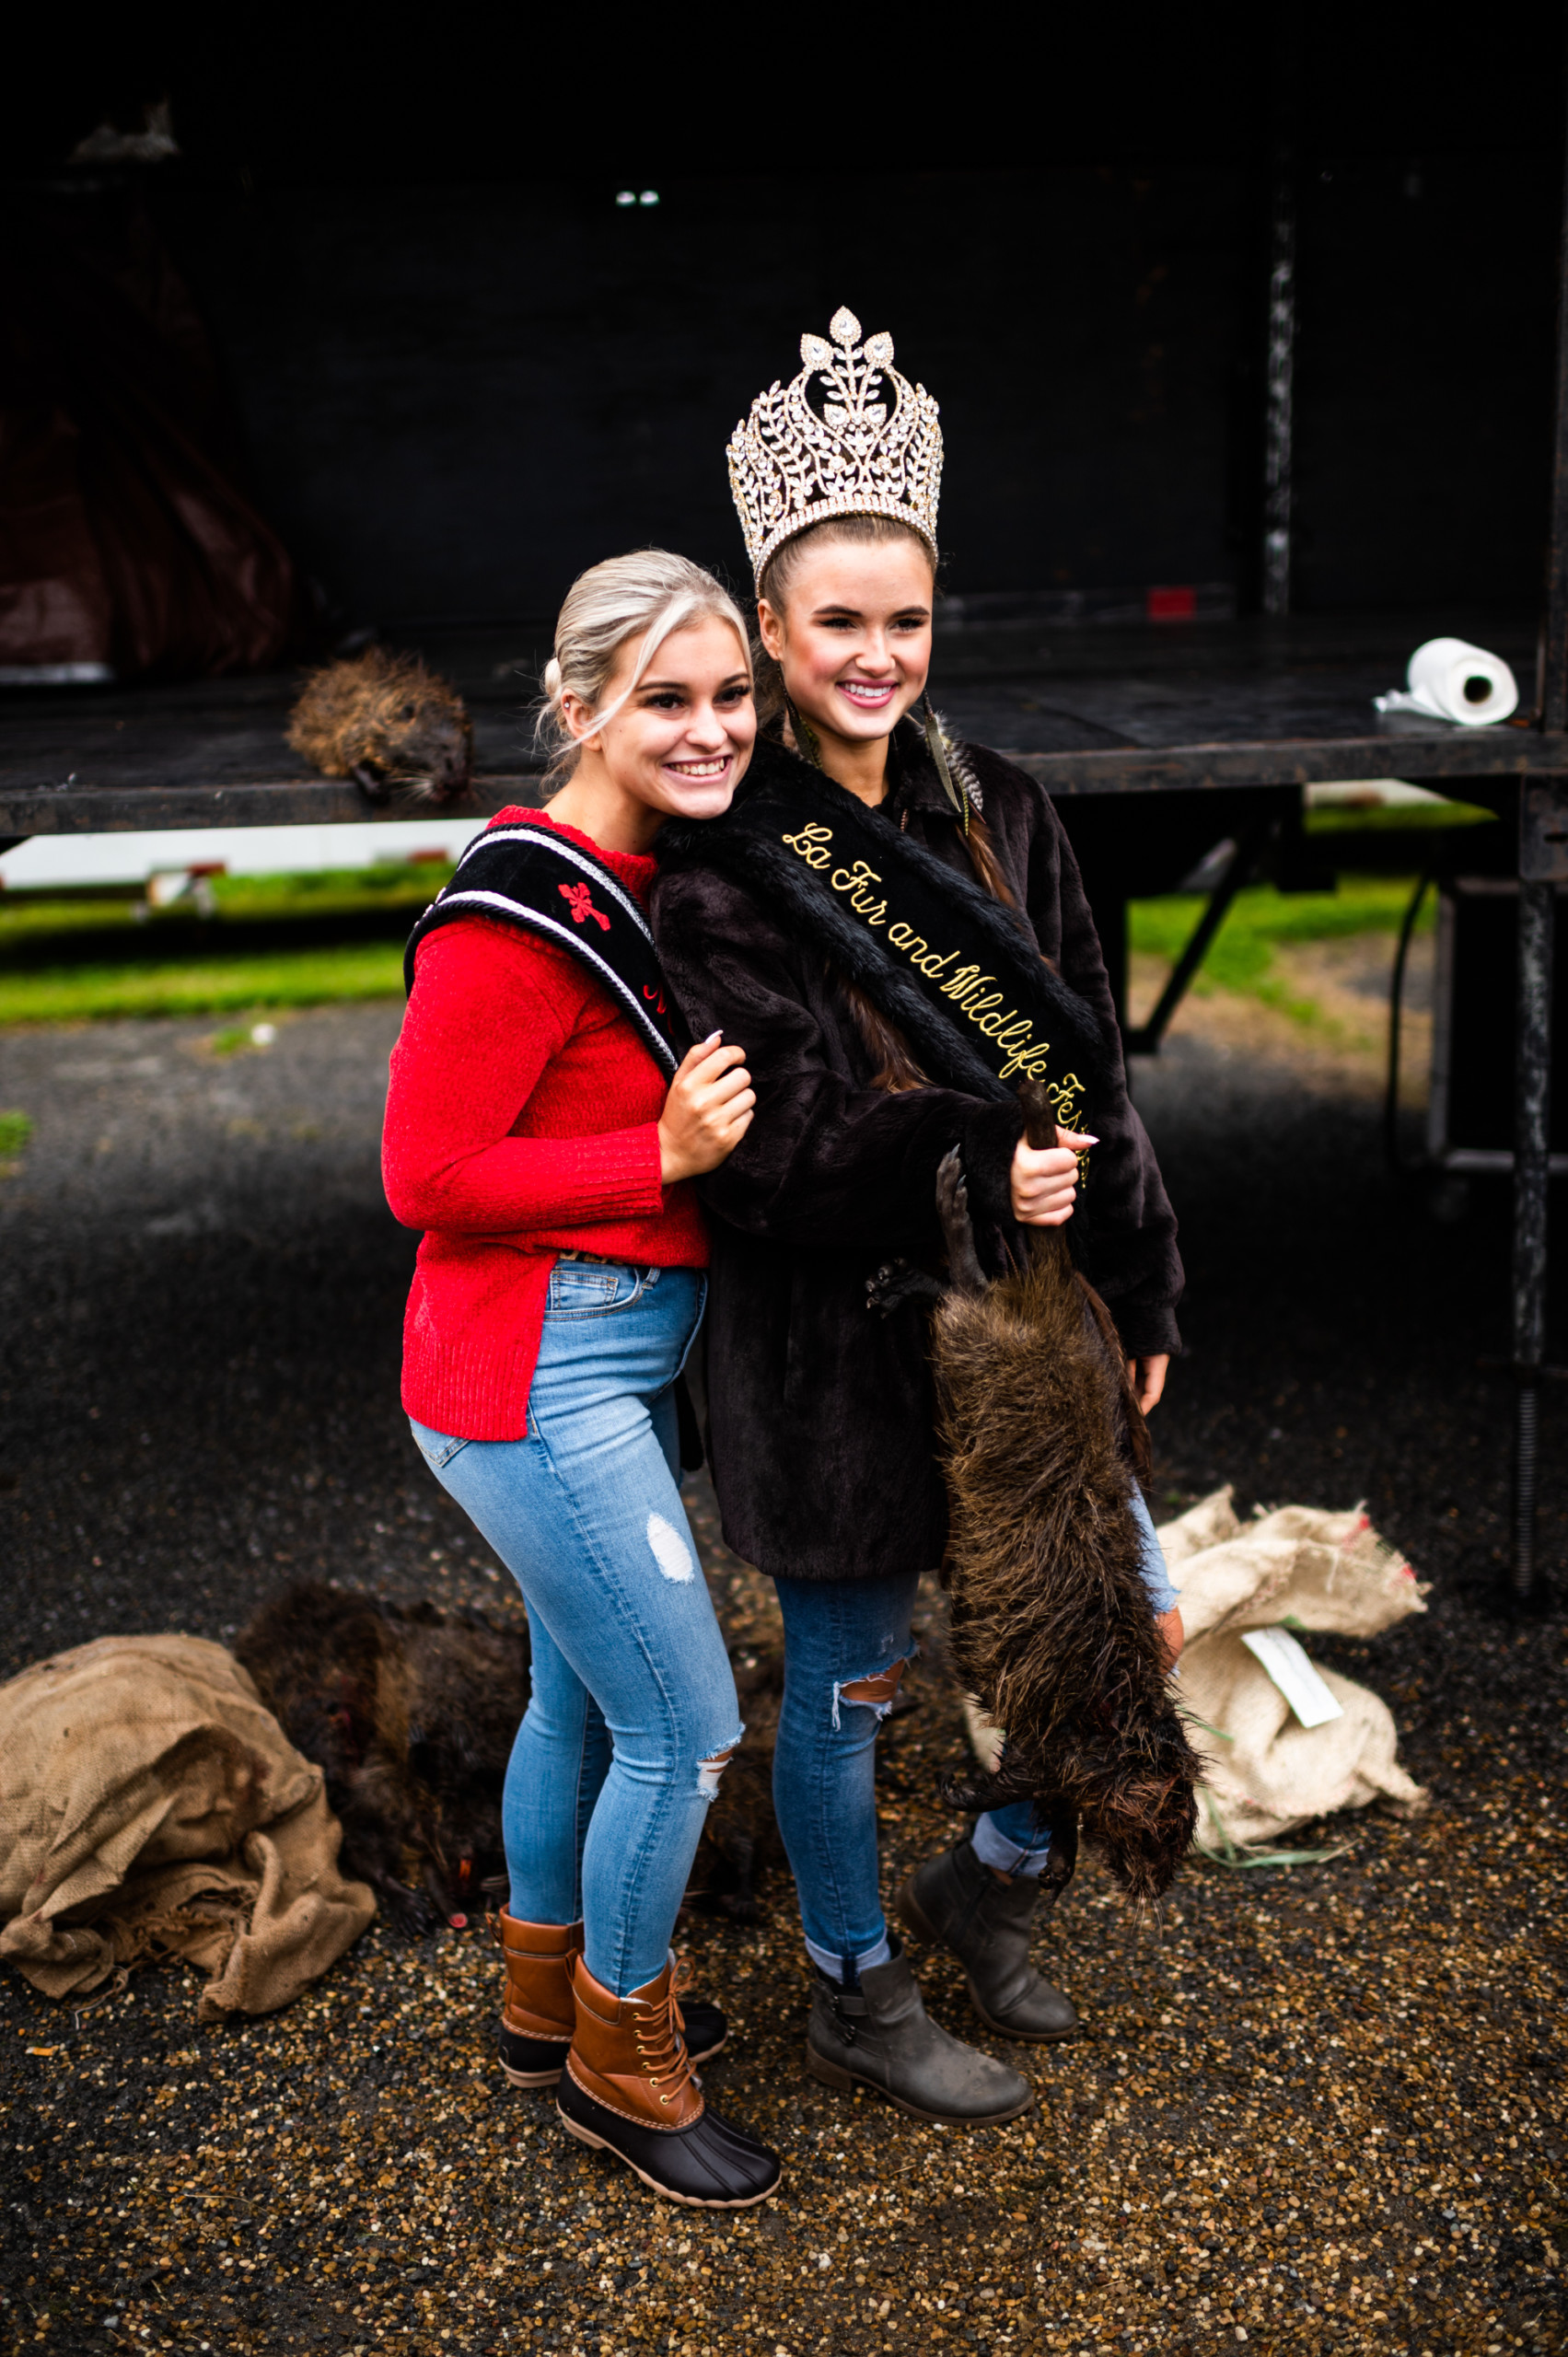 Festival queens pose with a recently killed nutria at the Fur & Wildlife Festival